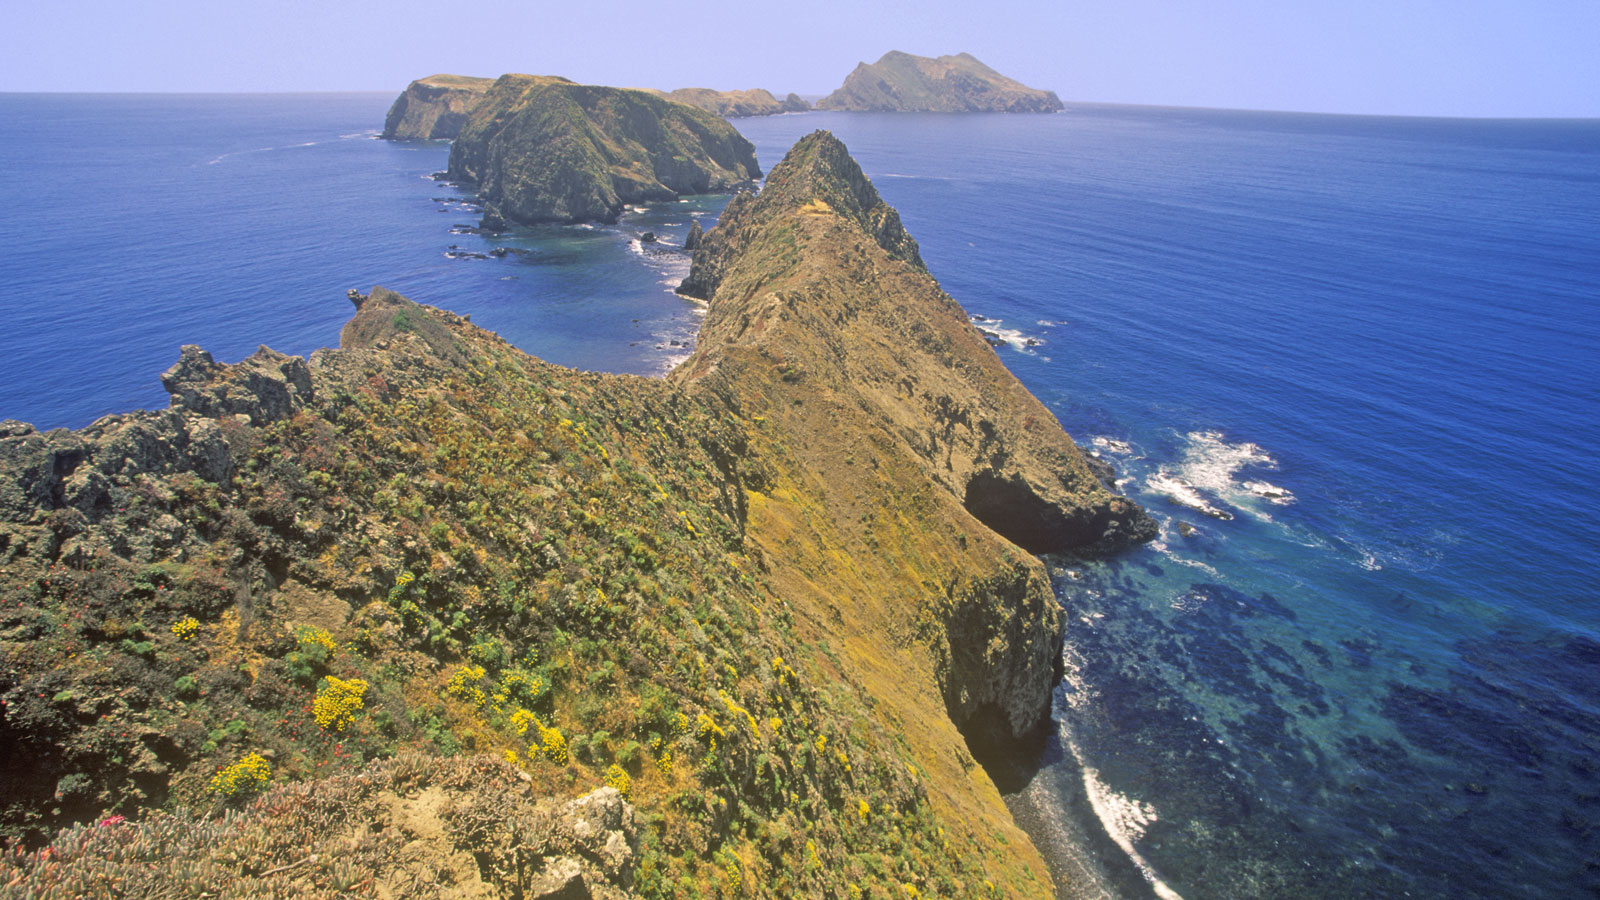 Channel Islands National Park, California